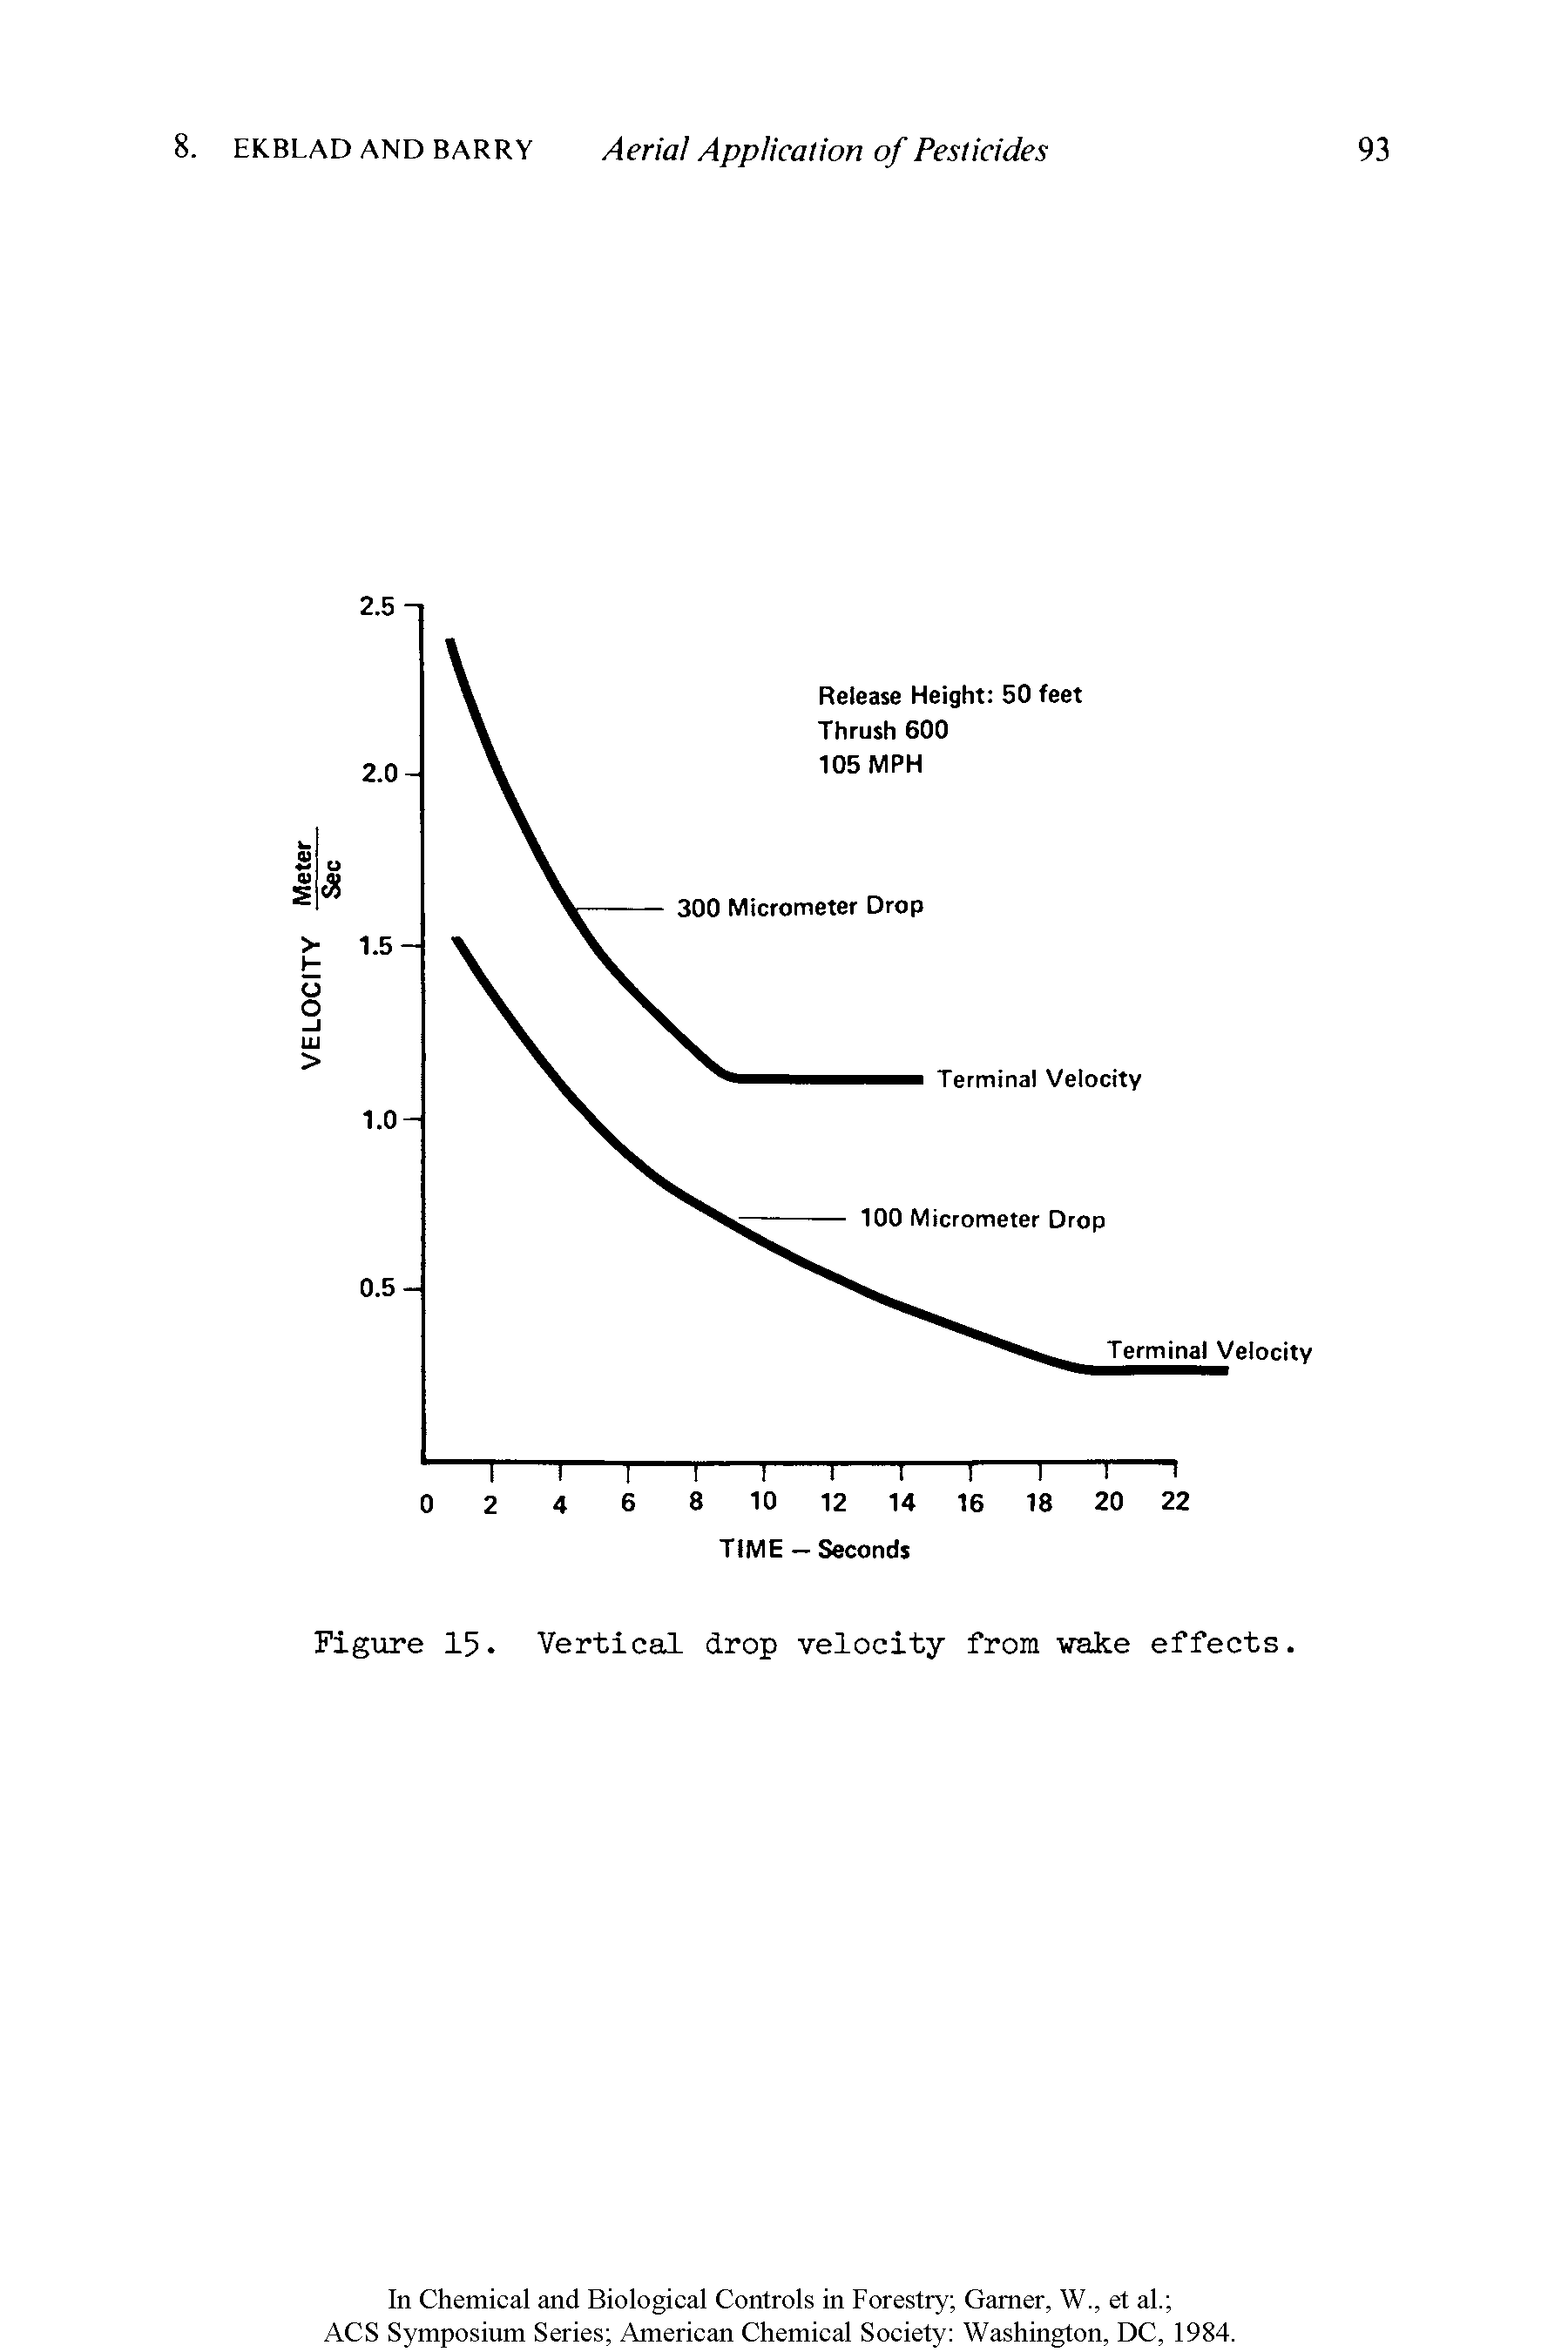 Figure 15. Vertical drop velocity from wake effects.